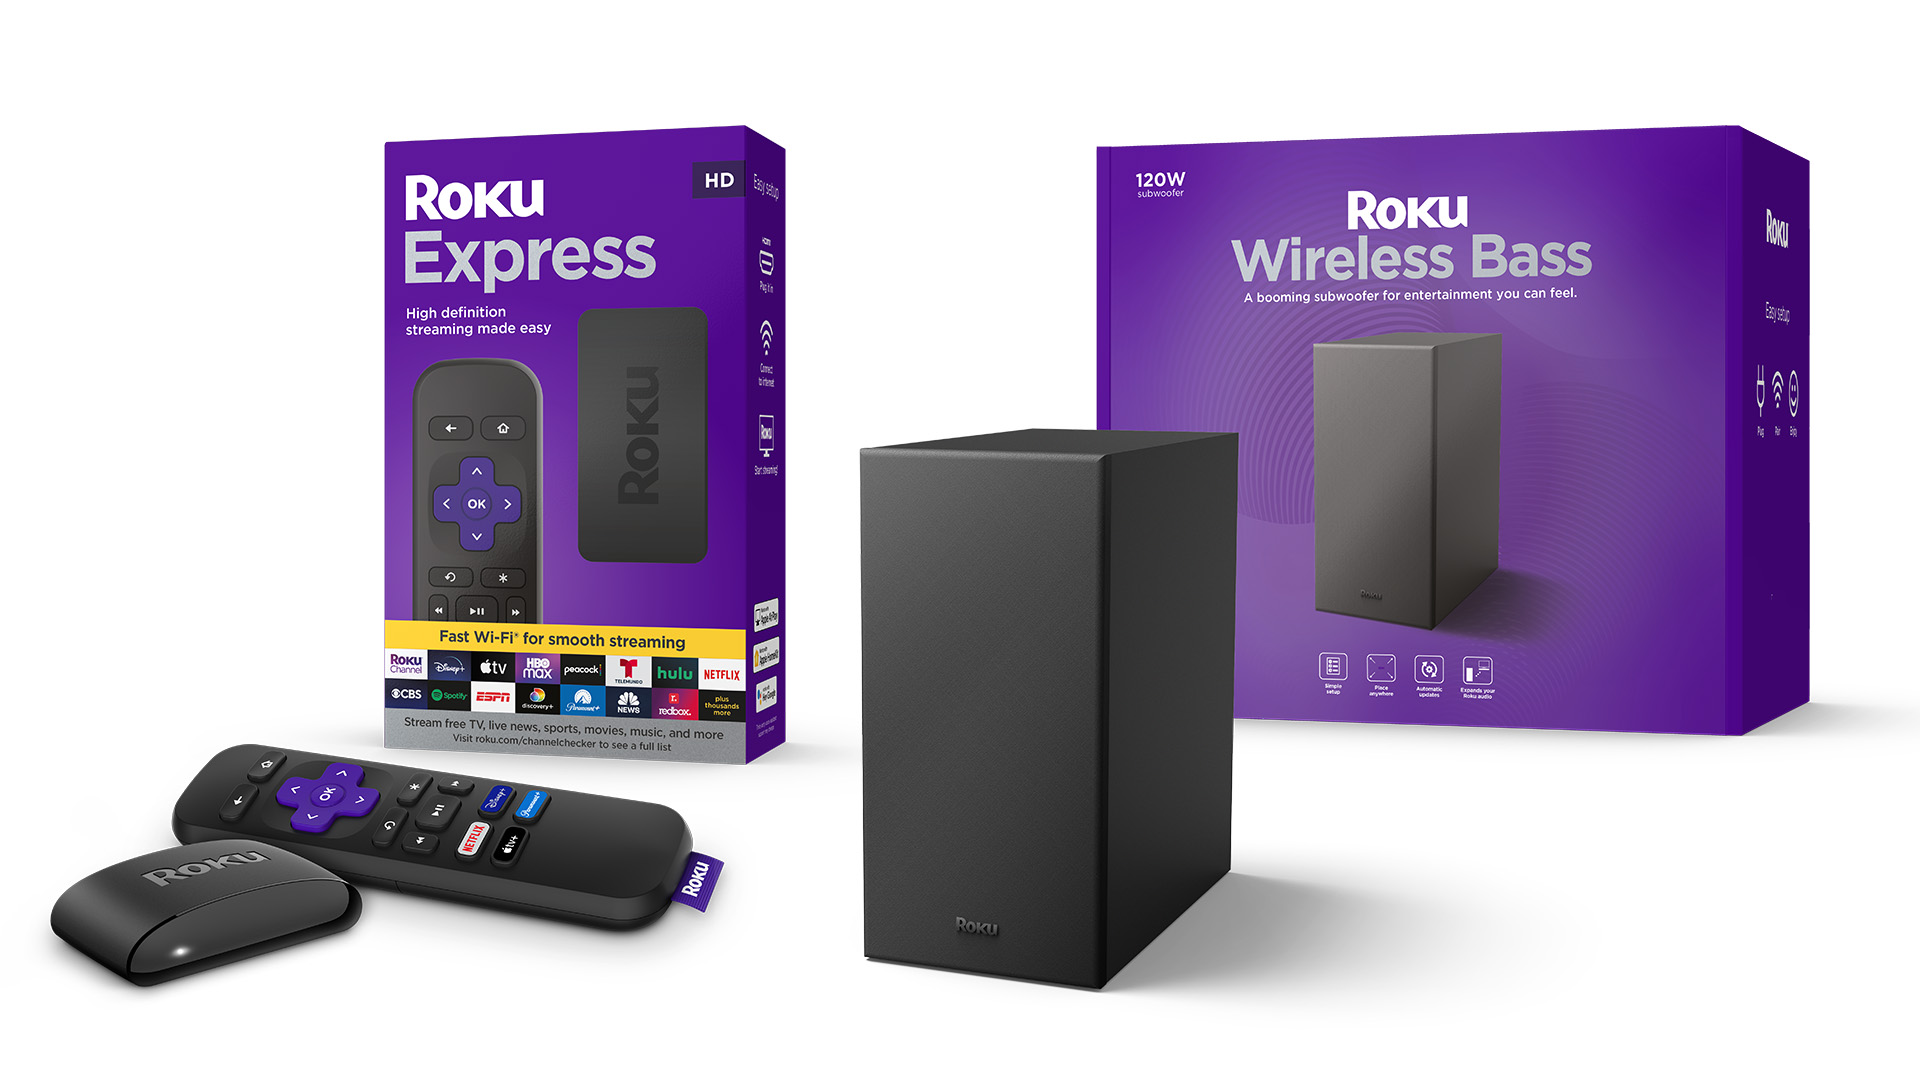 Roku’s Latest Express Adds Dual-Band WiFi, New Subwoofer Incoming